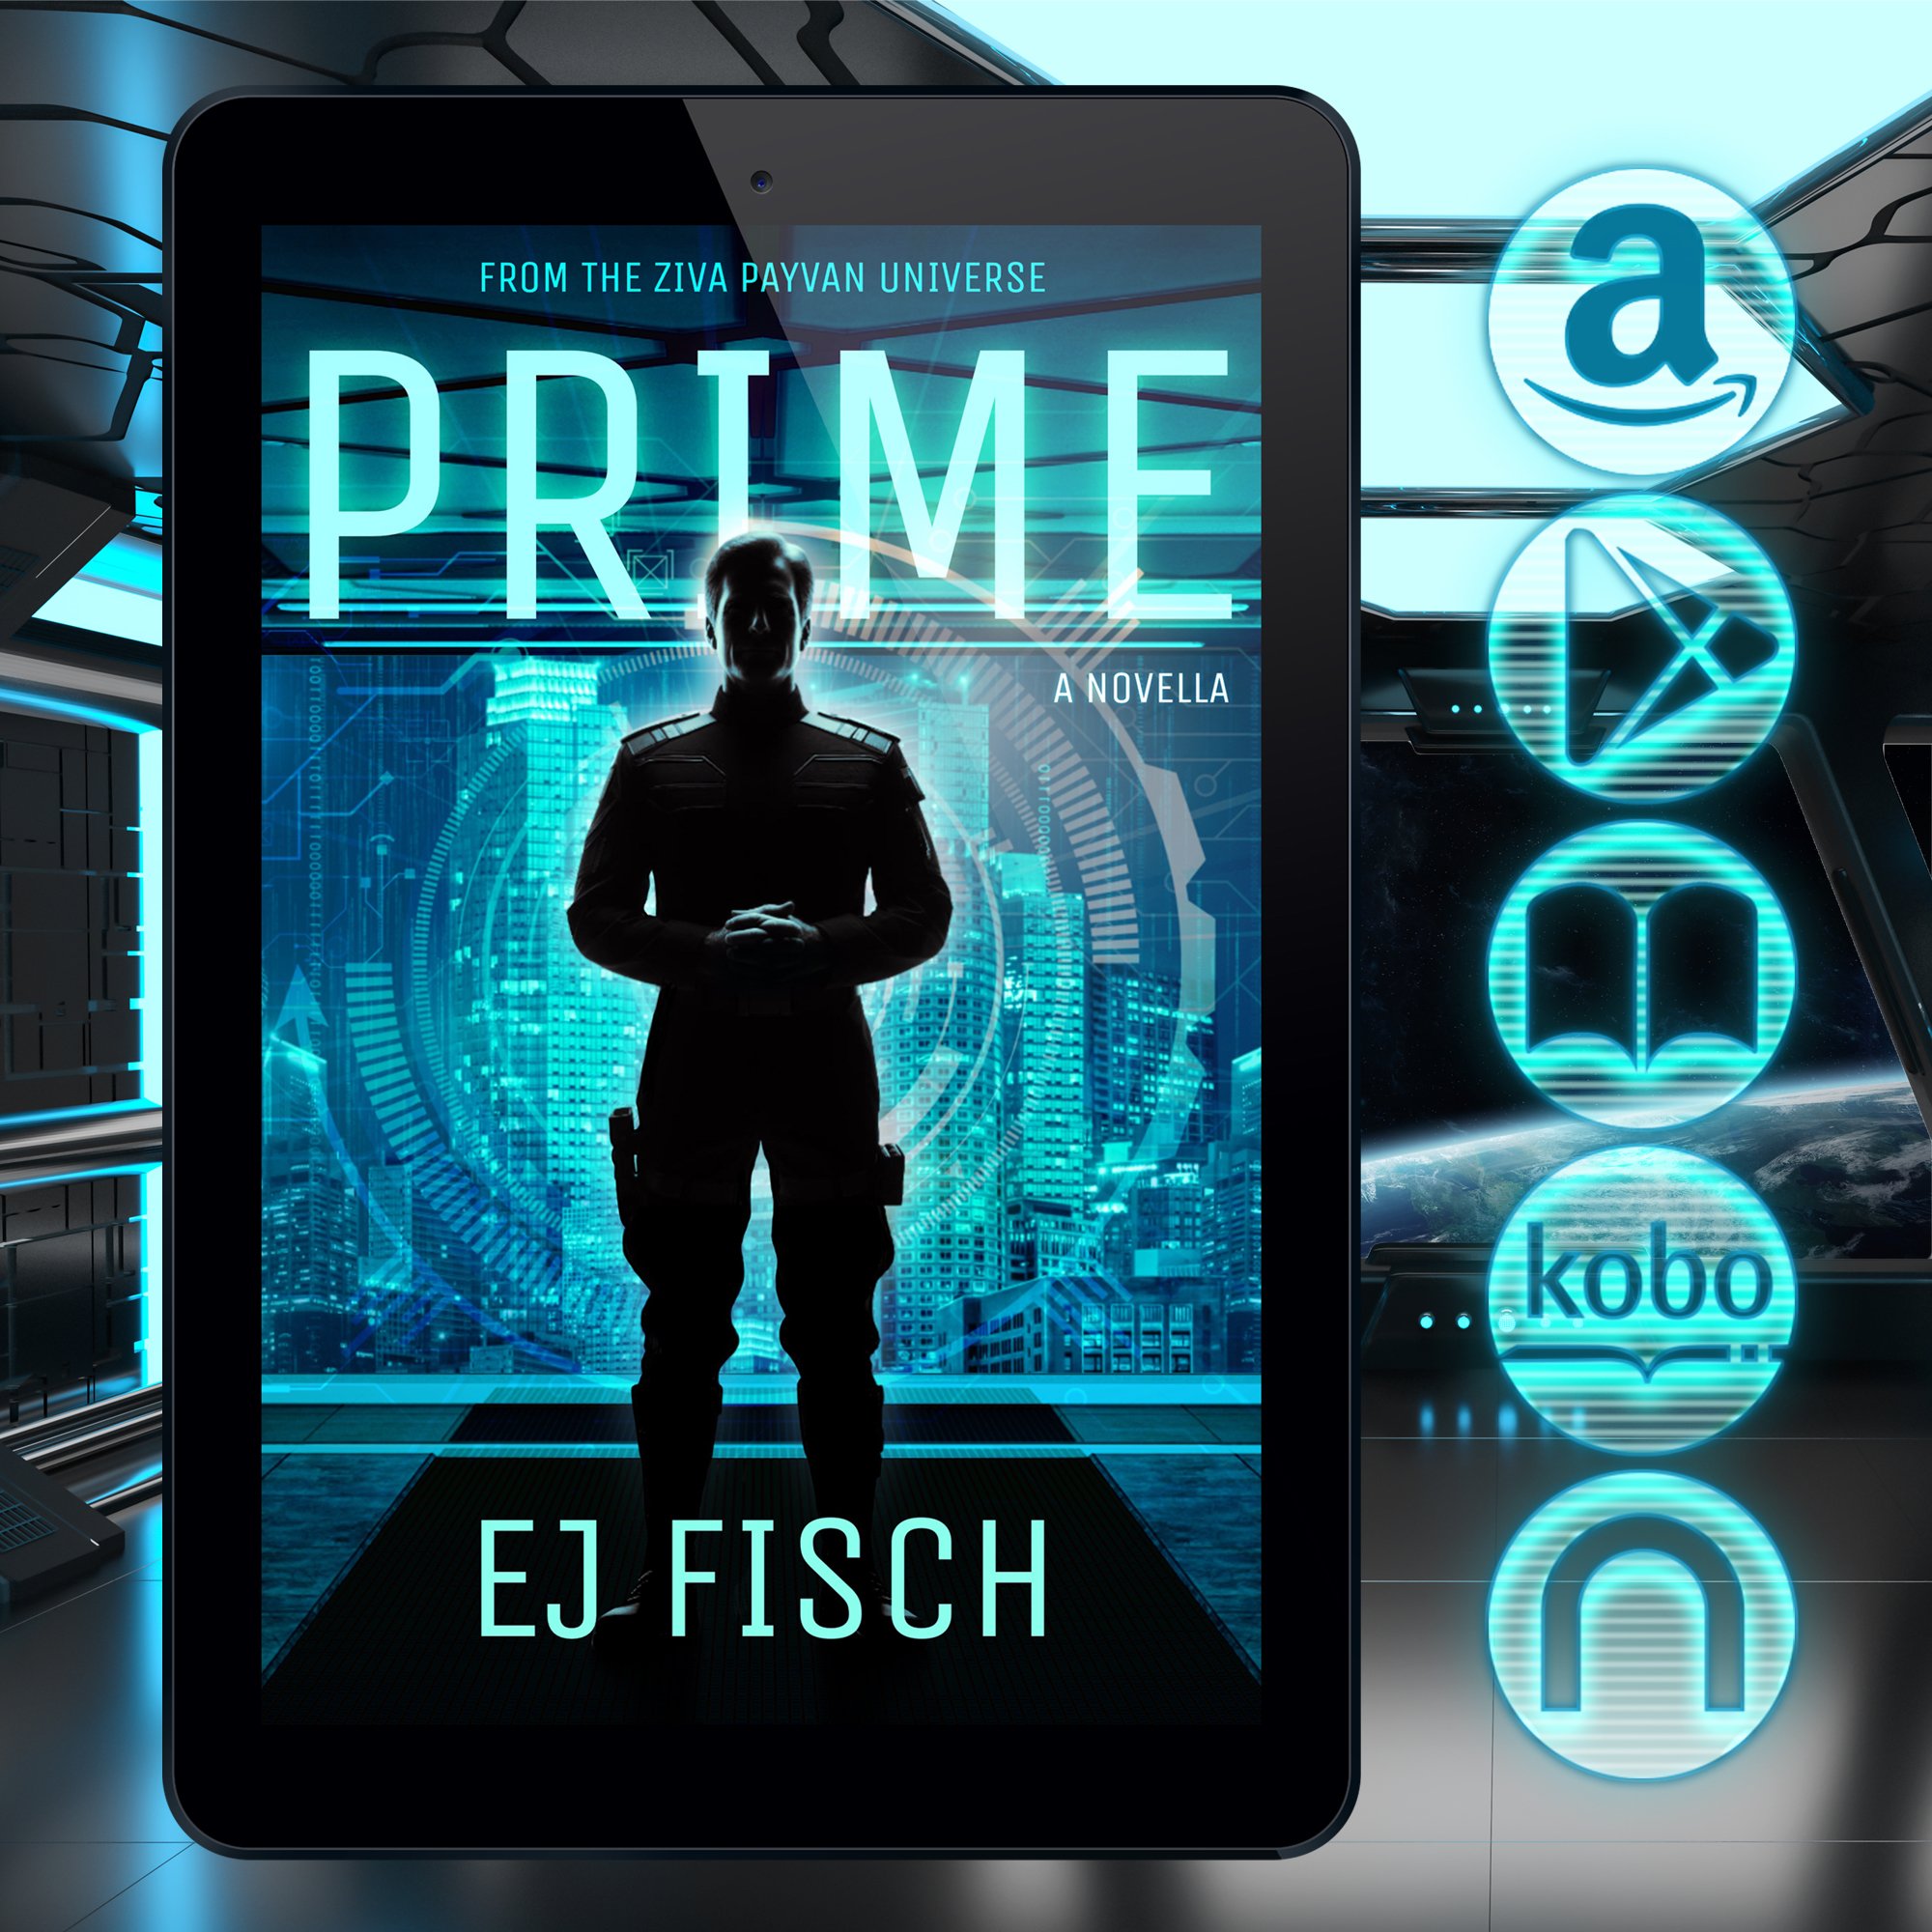 ICYMI in my newsletter yesterday...SURPRISE! New content!

I can't remember exactly how long I've had this little story in my head, but it sure was fun to write. And I'm still pretty obsessed with how the cover turned out 🤌🏼

PRIME is a prequel nov